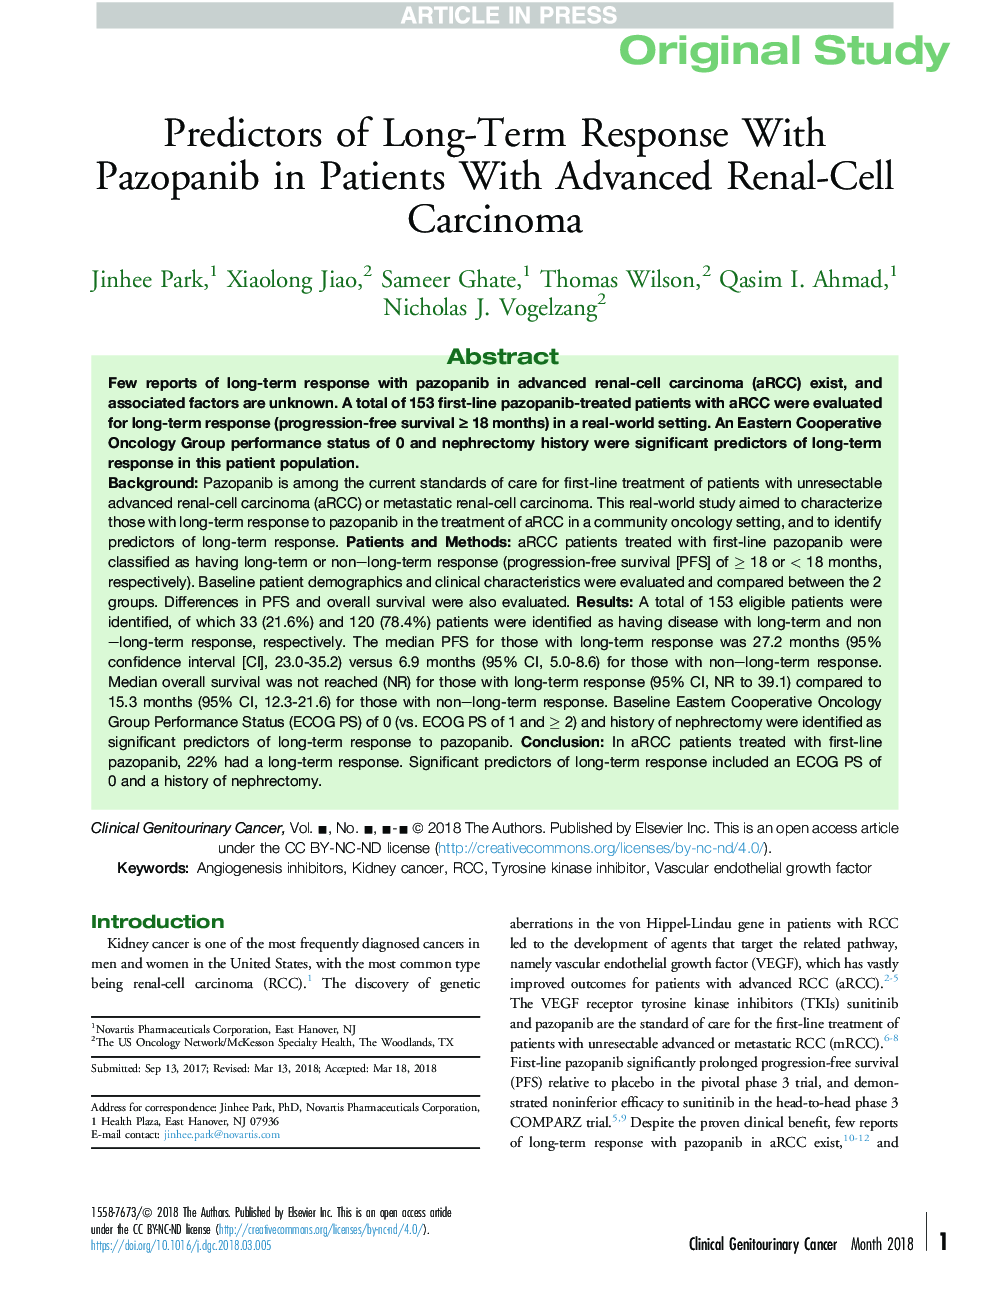 Predictors of Long-Term Response With Pazopanib in Patients With Advanced Renal-Cell Carcinoma